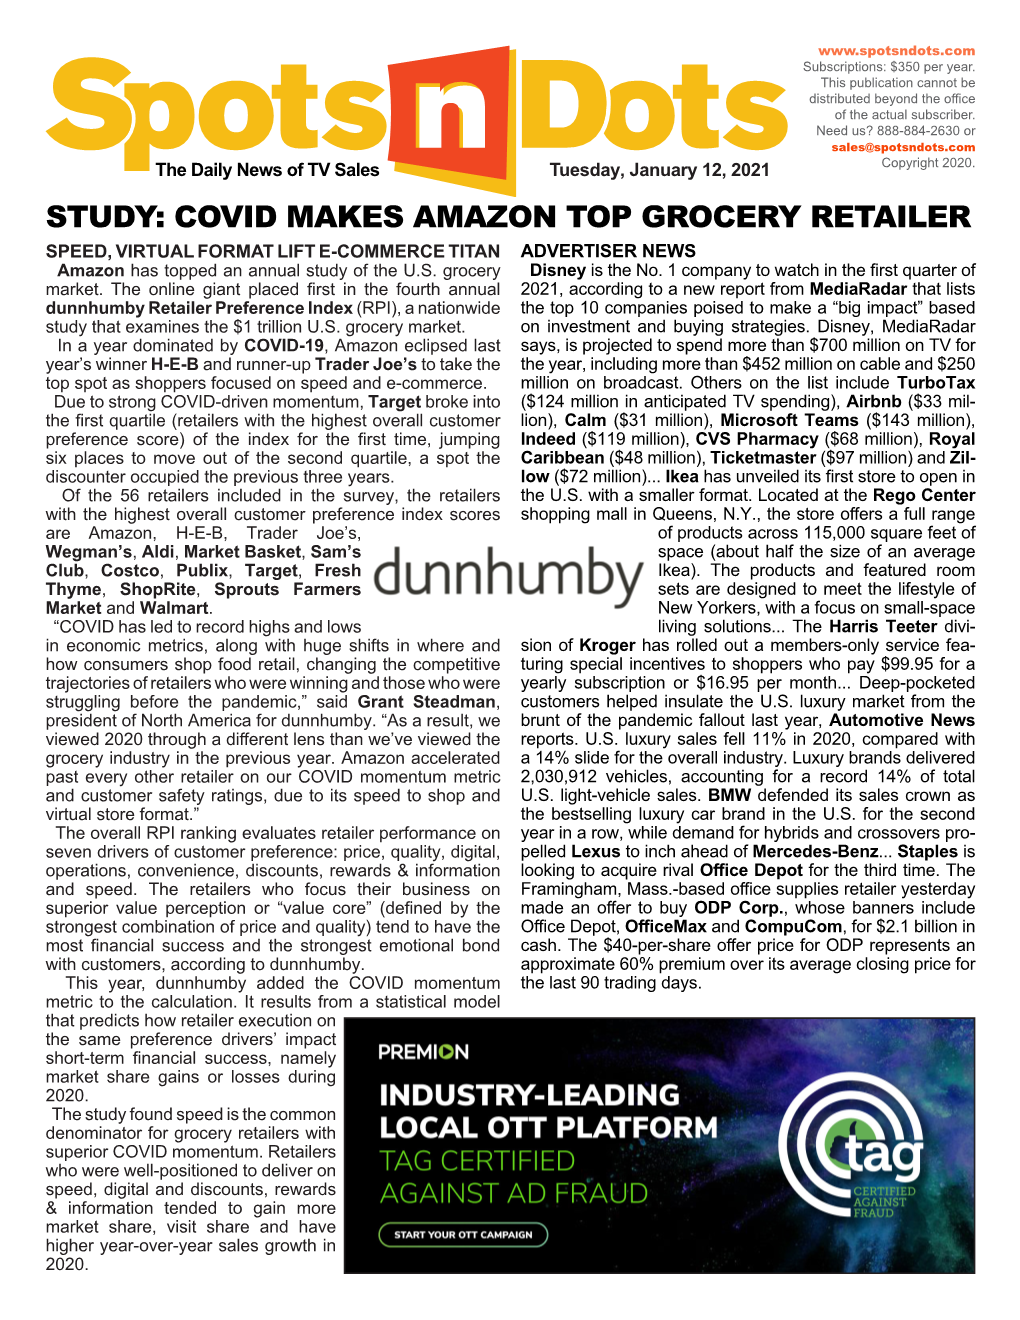 STUDY: COVID MAKES AMAZON TOP GROCERY RETAILER SPEED, VIRTUAL FORMAT LIFT E-COMMERCE TITAN ADVERTISER NEWS Amazon Has Topped an Annual Study of the U.S